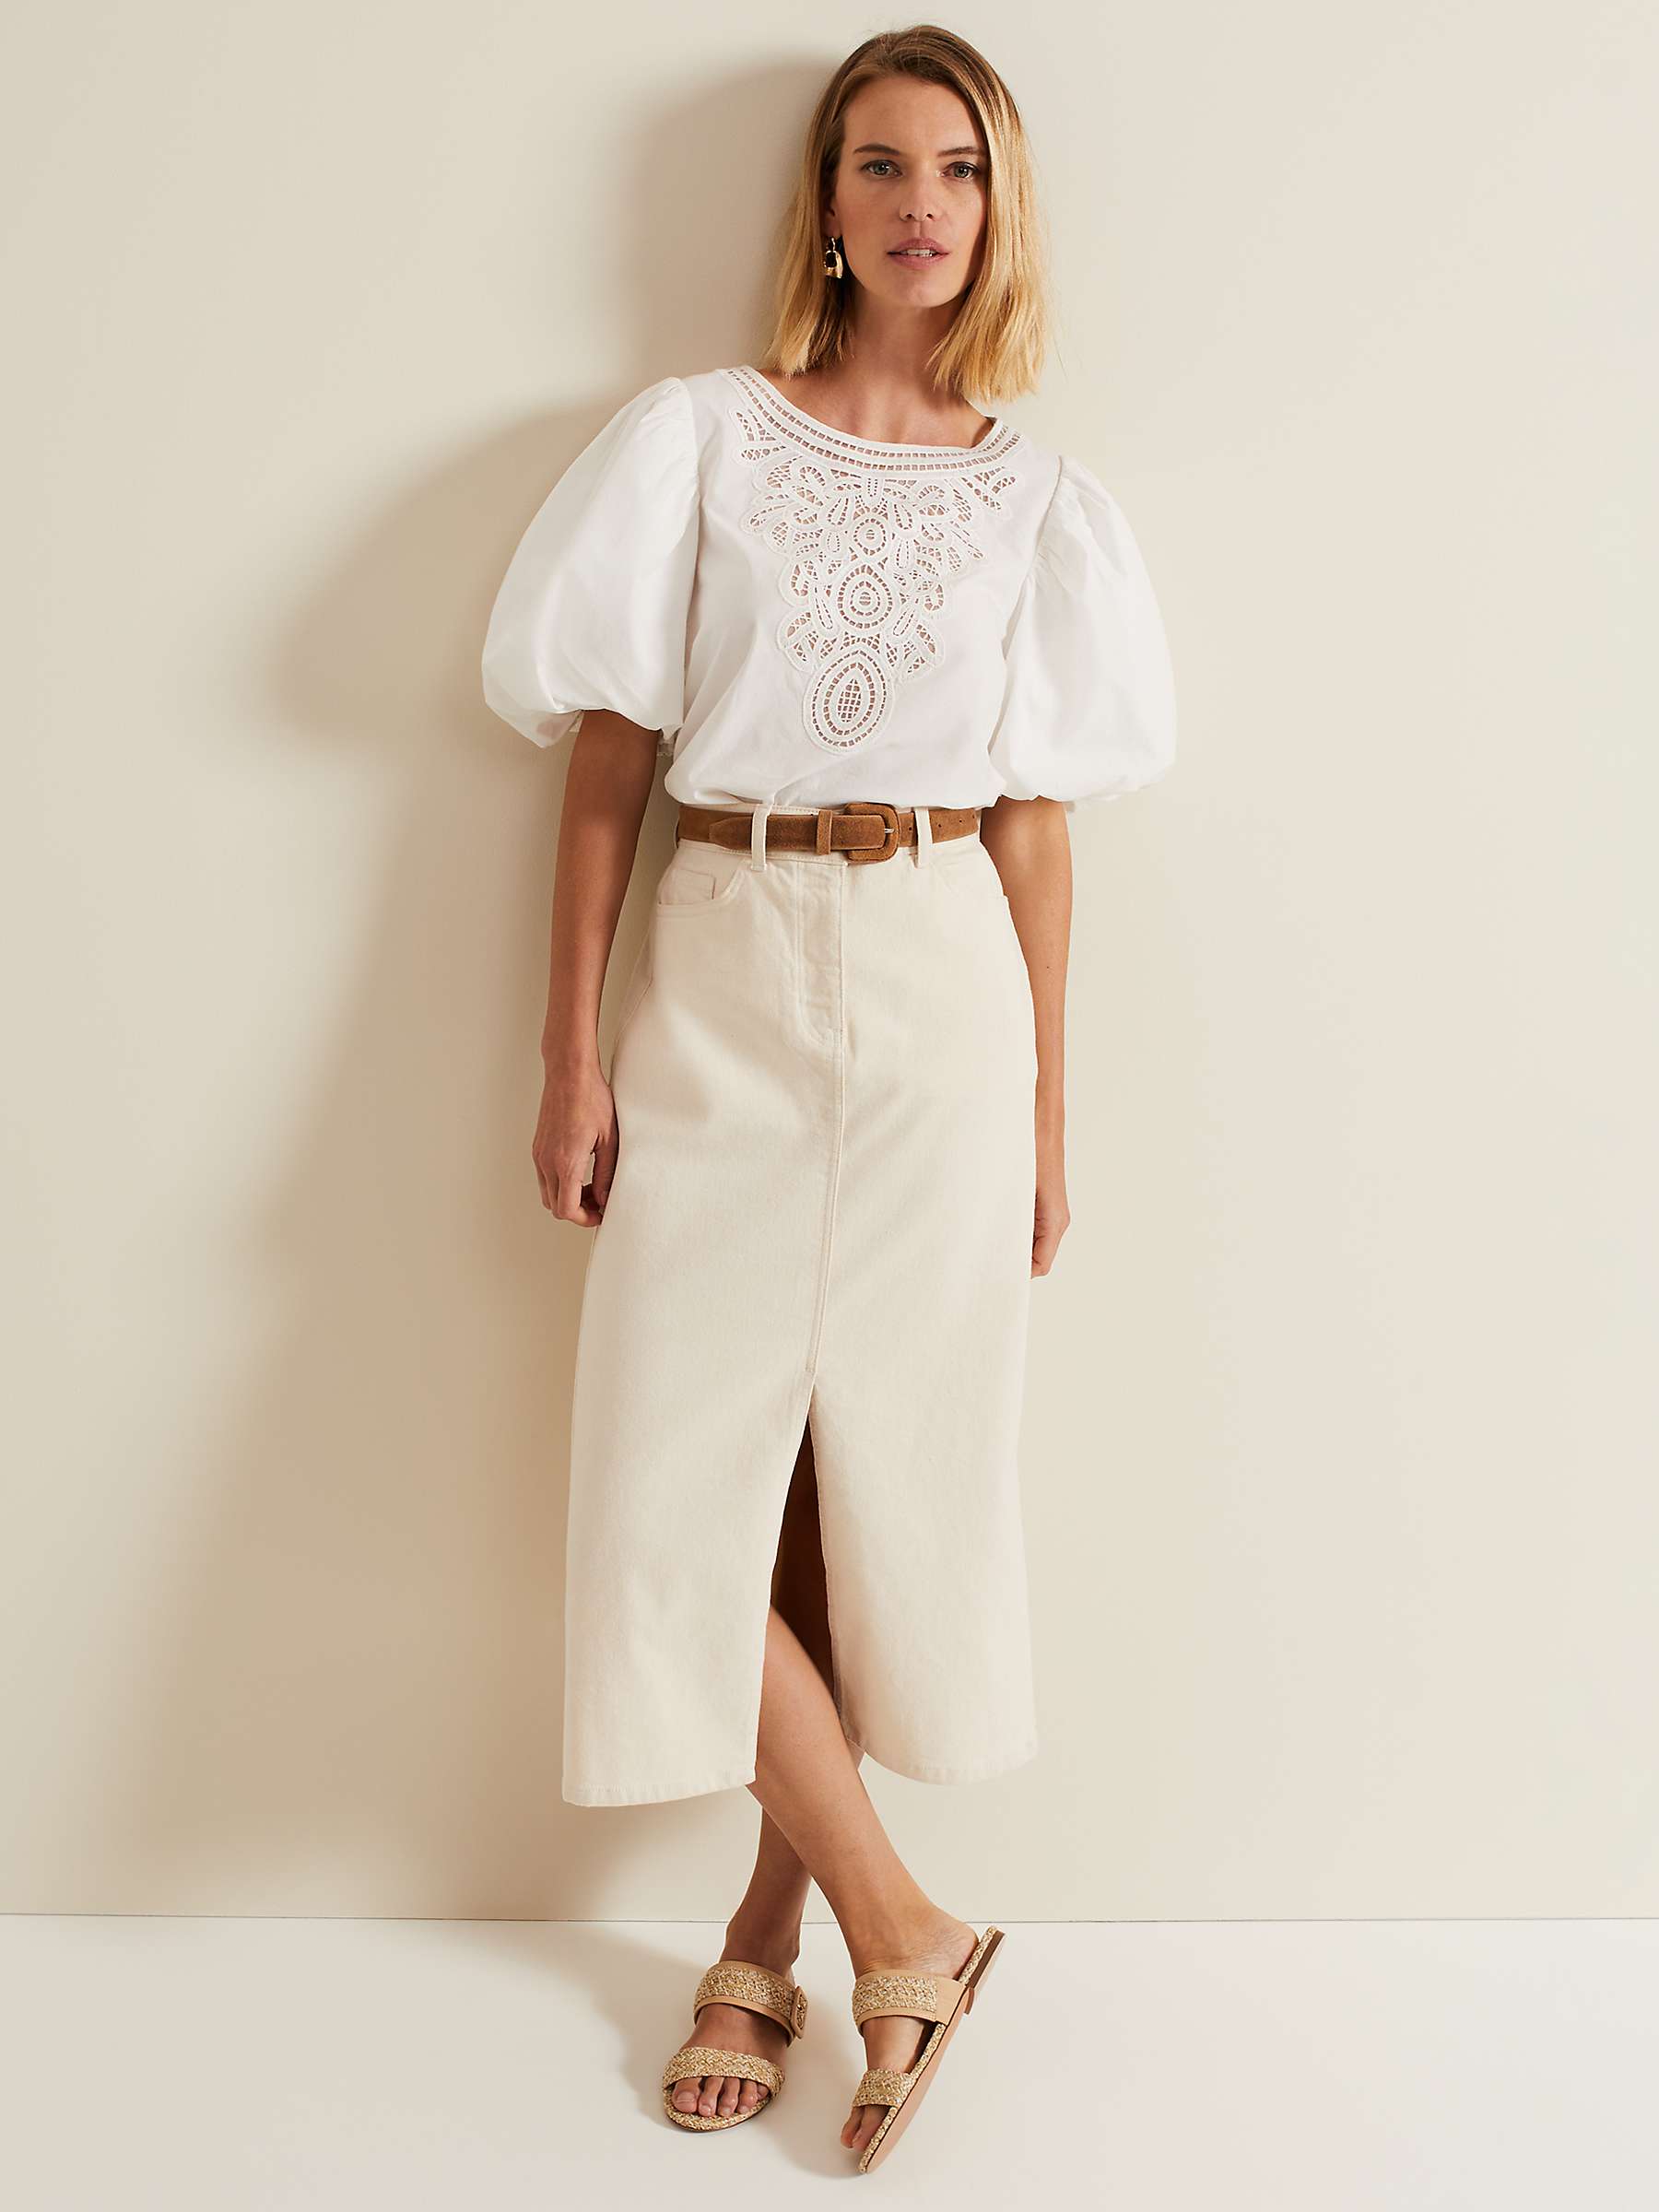 Buy Phase Eight Lillianna Embroidered Cotton Blouse, White Online at johnlewis.com